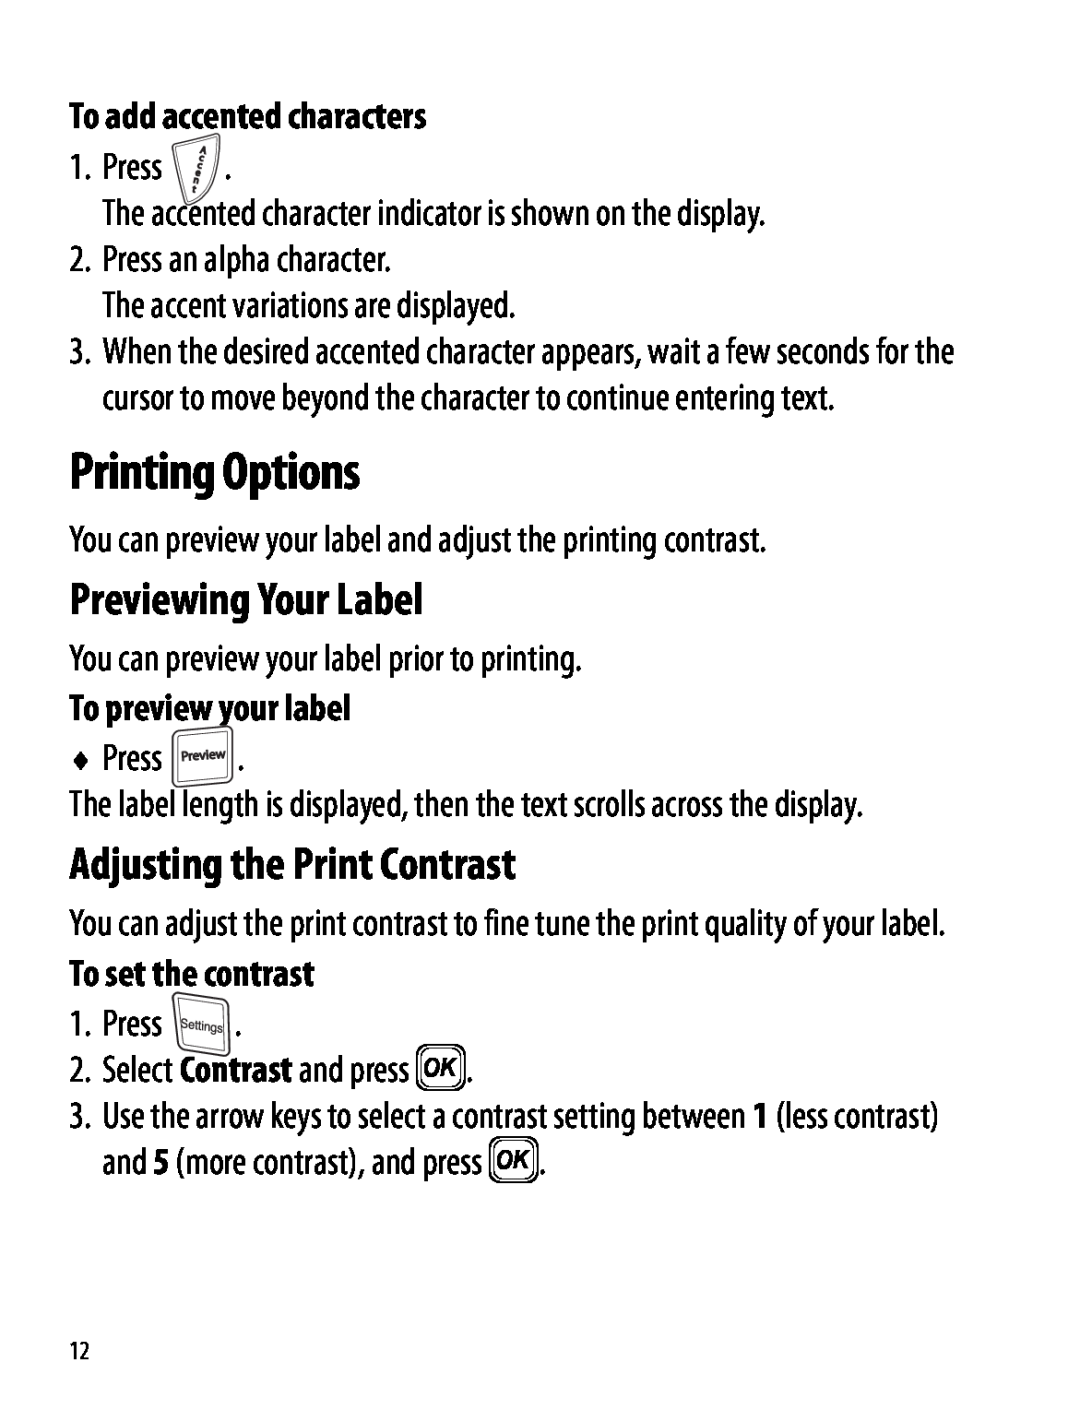 Dymo 120P manual Printing Options, Previewing Your Label, Adjusting the Print Contrast, To add accented characters 